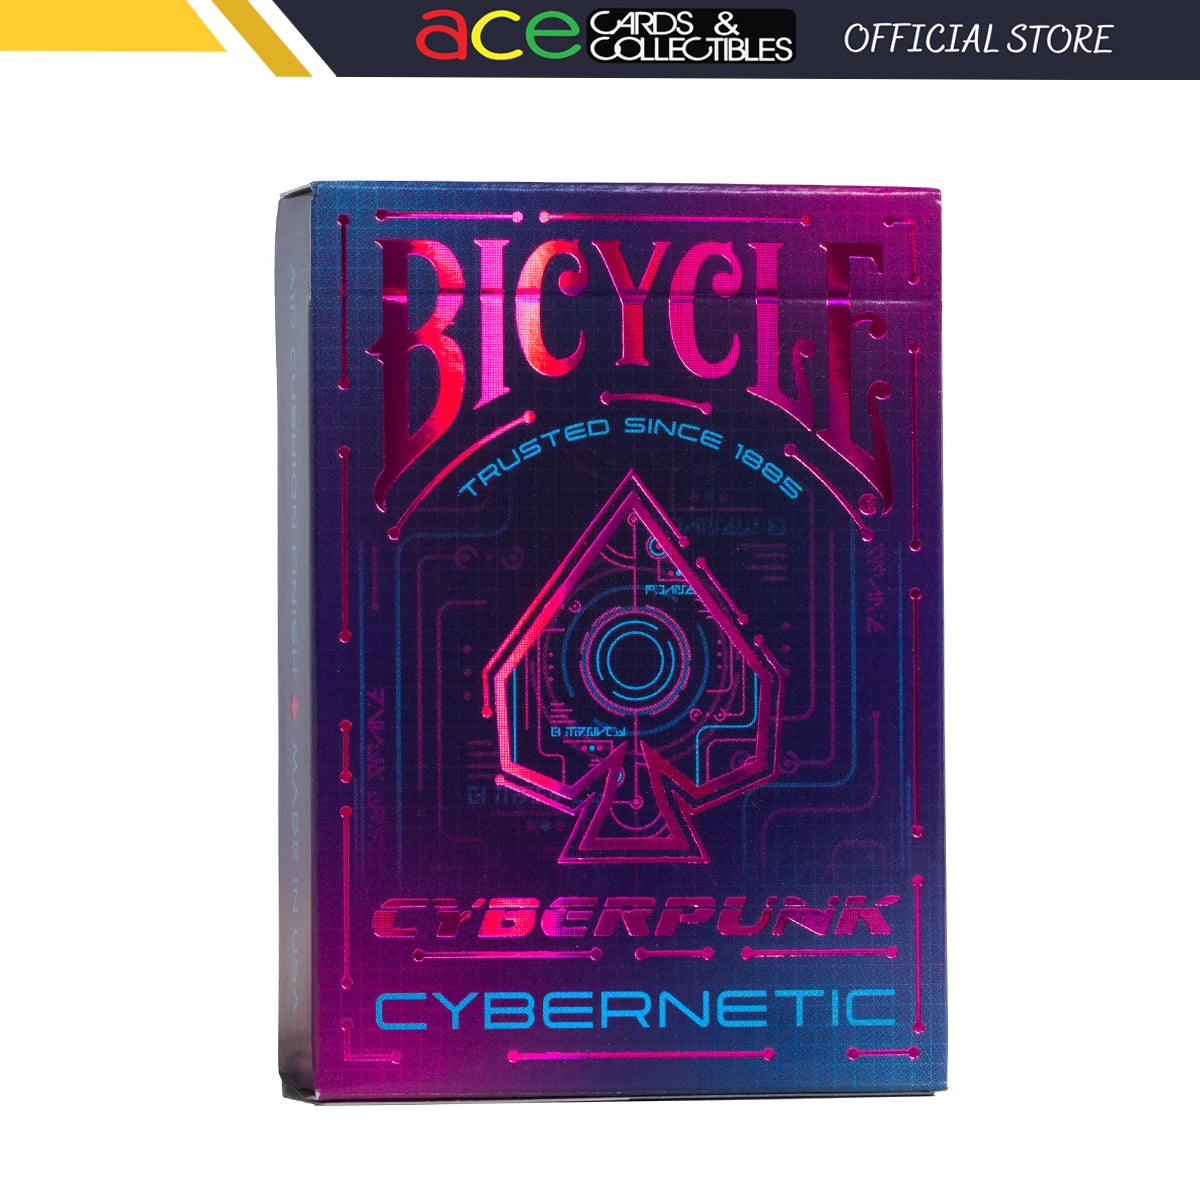 Bicycle Cyberpunk Cybernetic Playing Cards-United States Playing Cards Company-Ace Cards & Collectibles